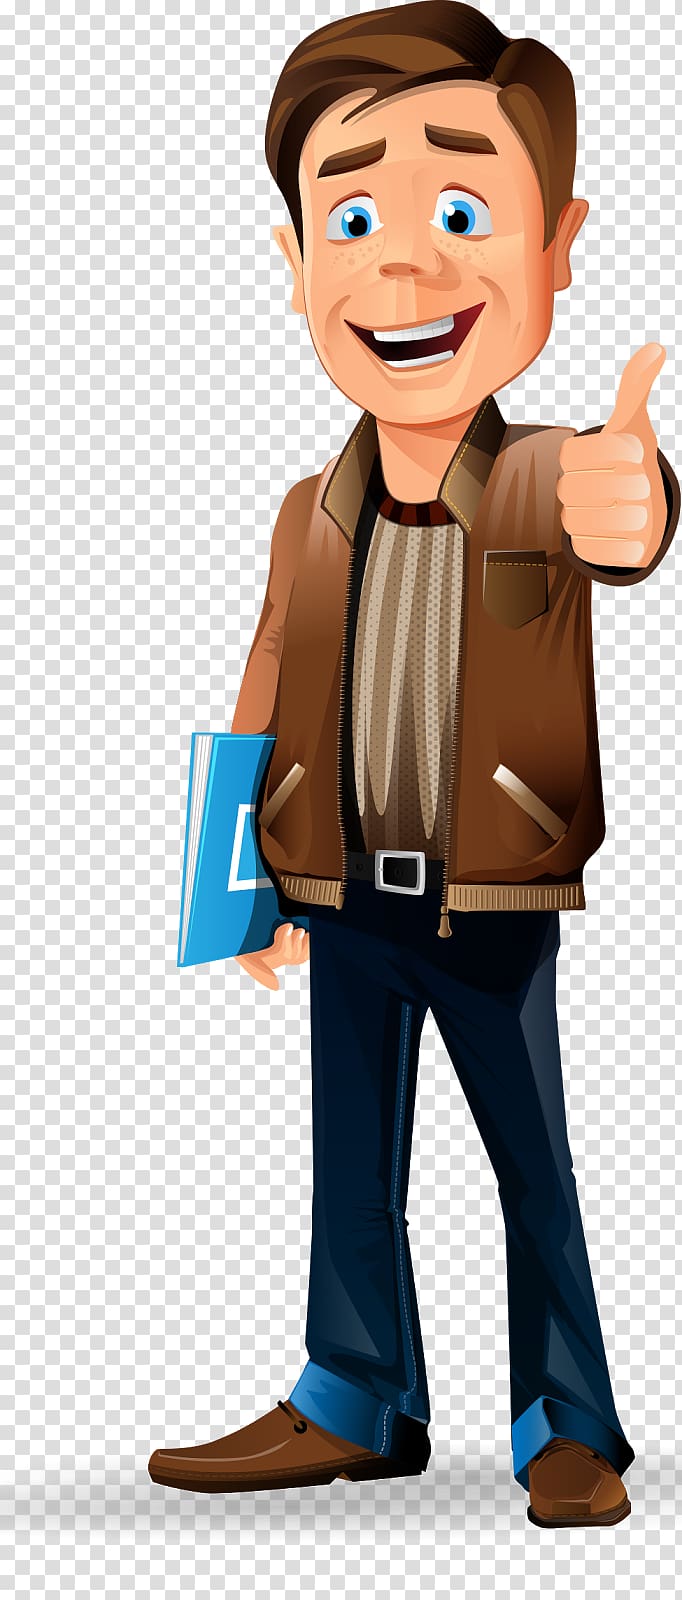 Businessperson Cartoon , Character transparent background PNG clipart